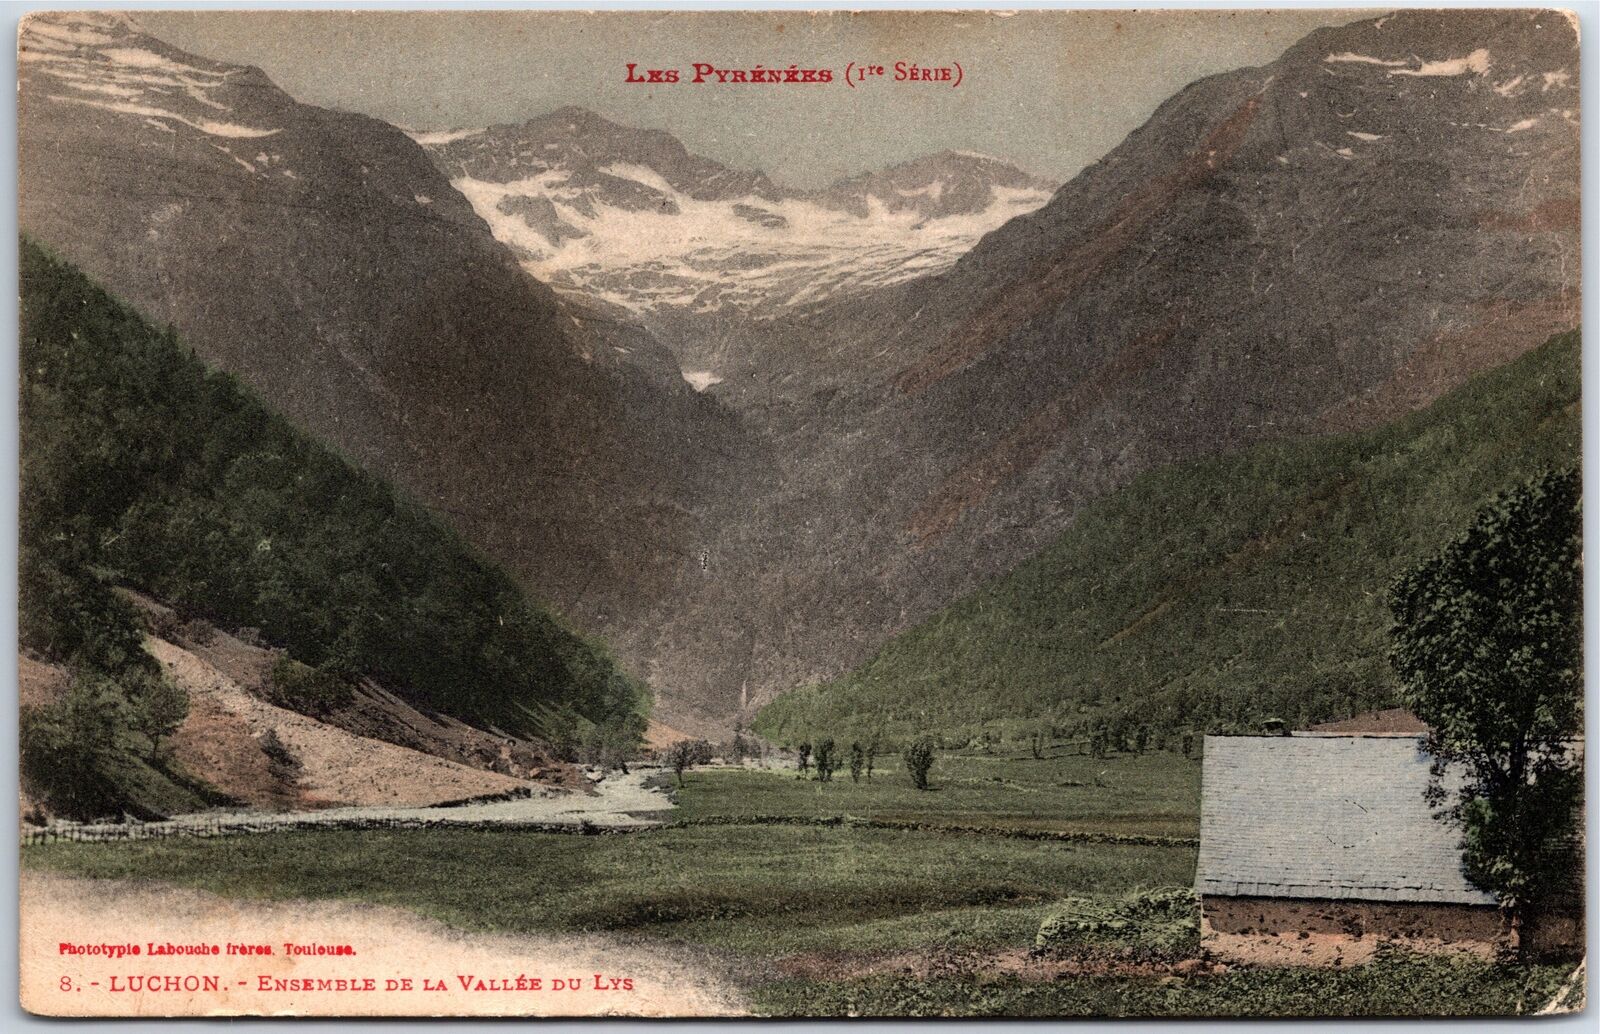 VINTAGE POSTCARD VALLEY DU LYS AMERICAN EXPEDITIONARY FORECE SOLDIER'S MAIL 1919